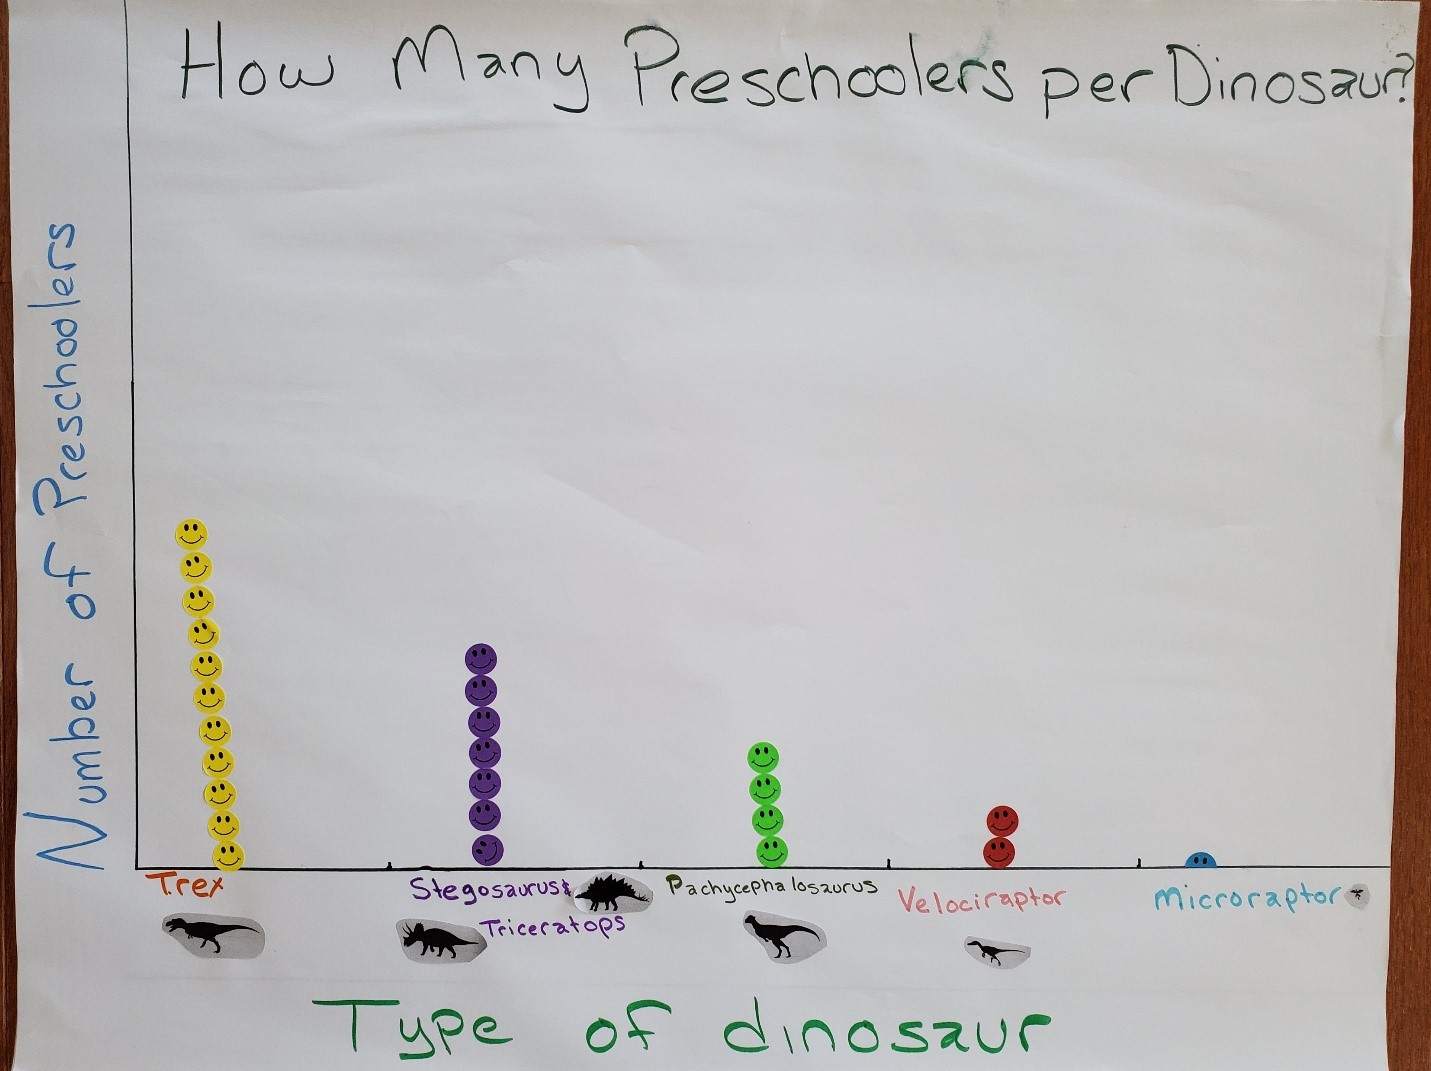 A student graph shows how many young learners it takes to equal the size of common dinosaurs.